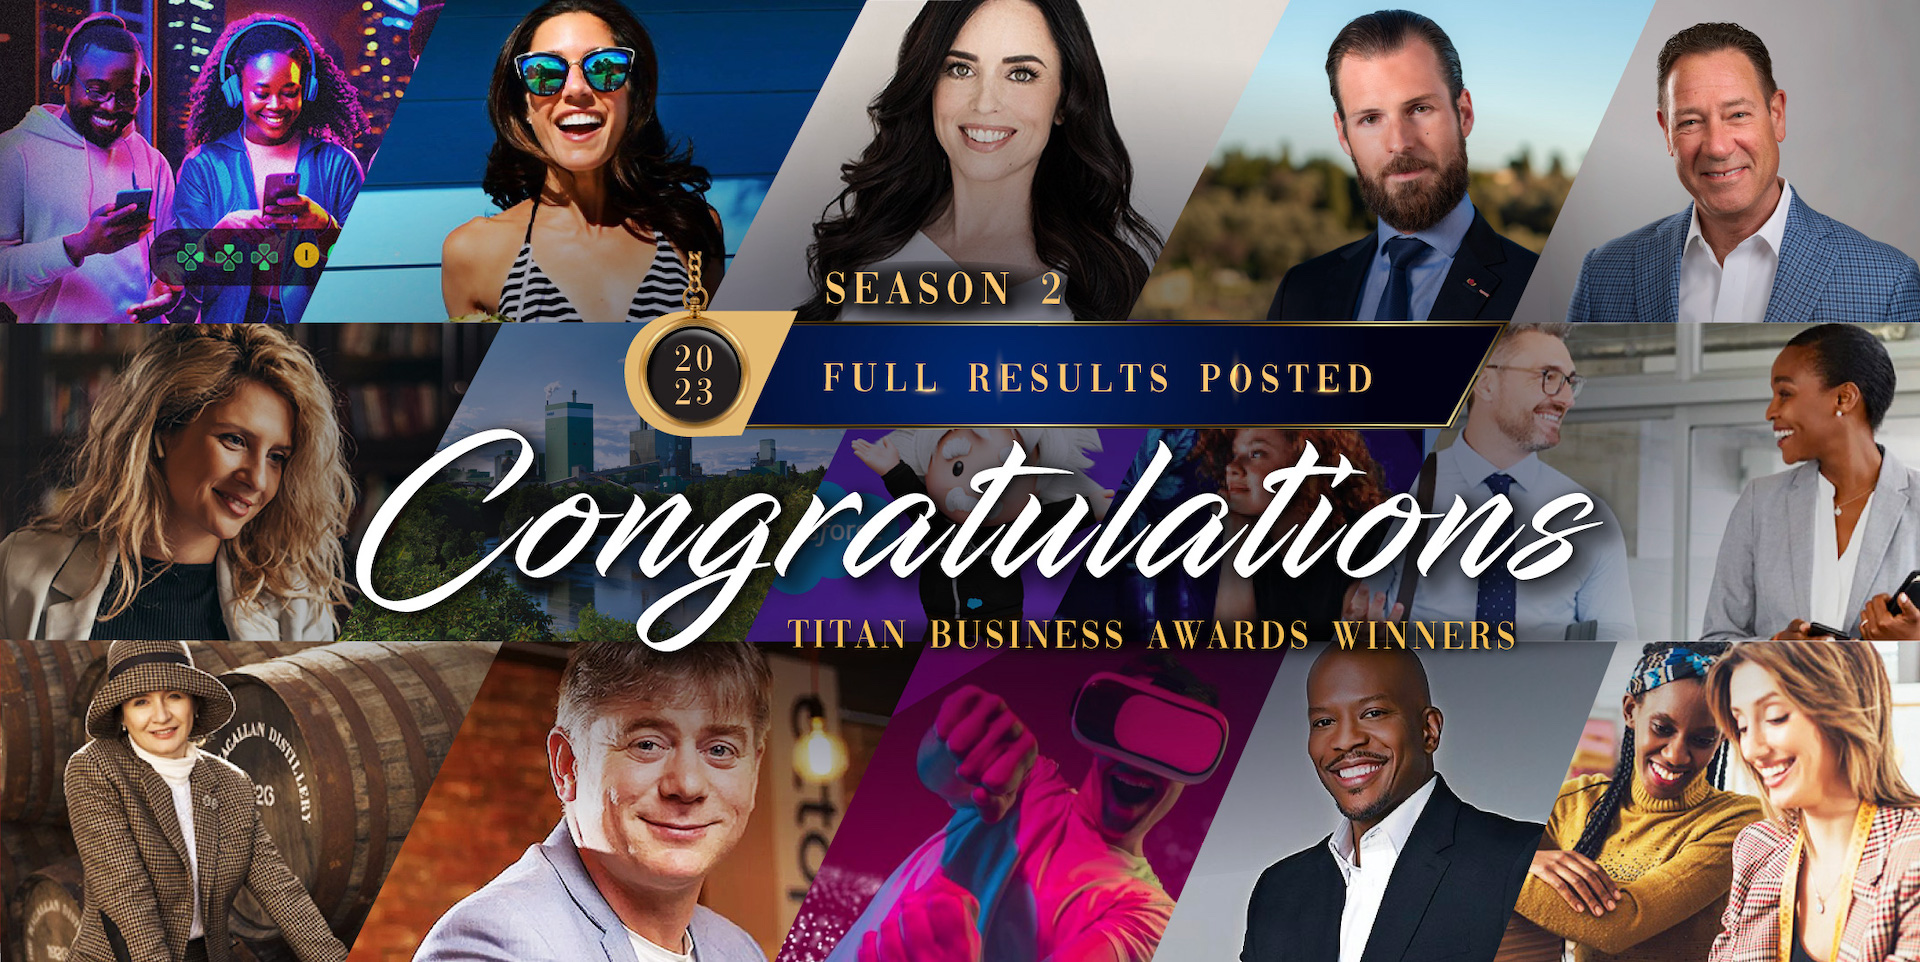 2023 TITAN Business Awards S2 Full Results Announced!